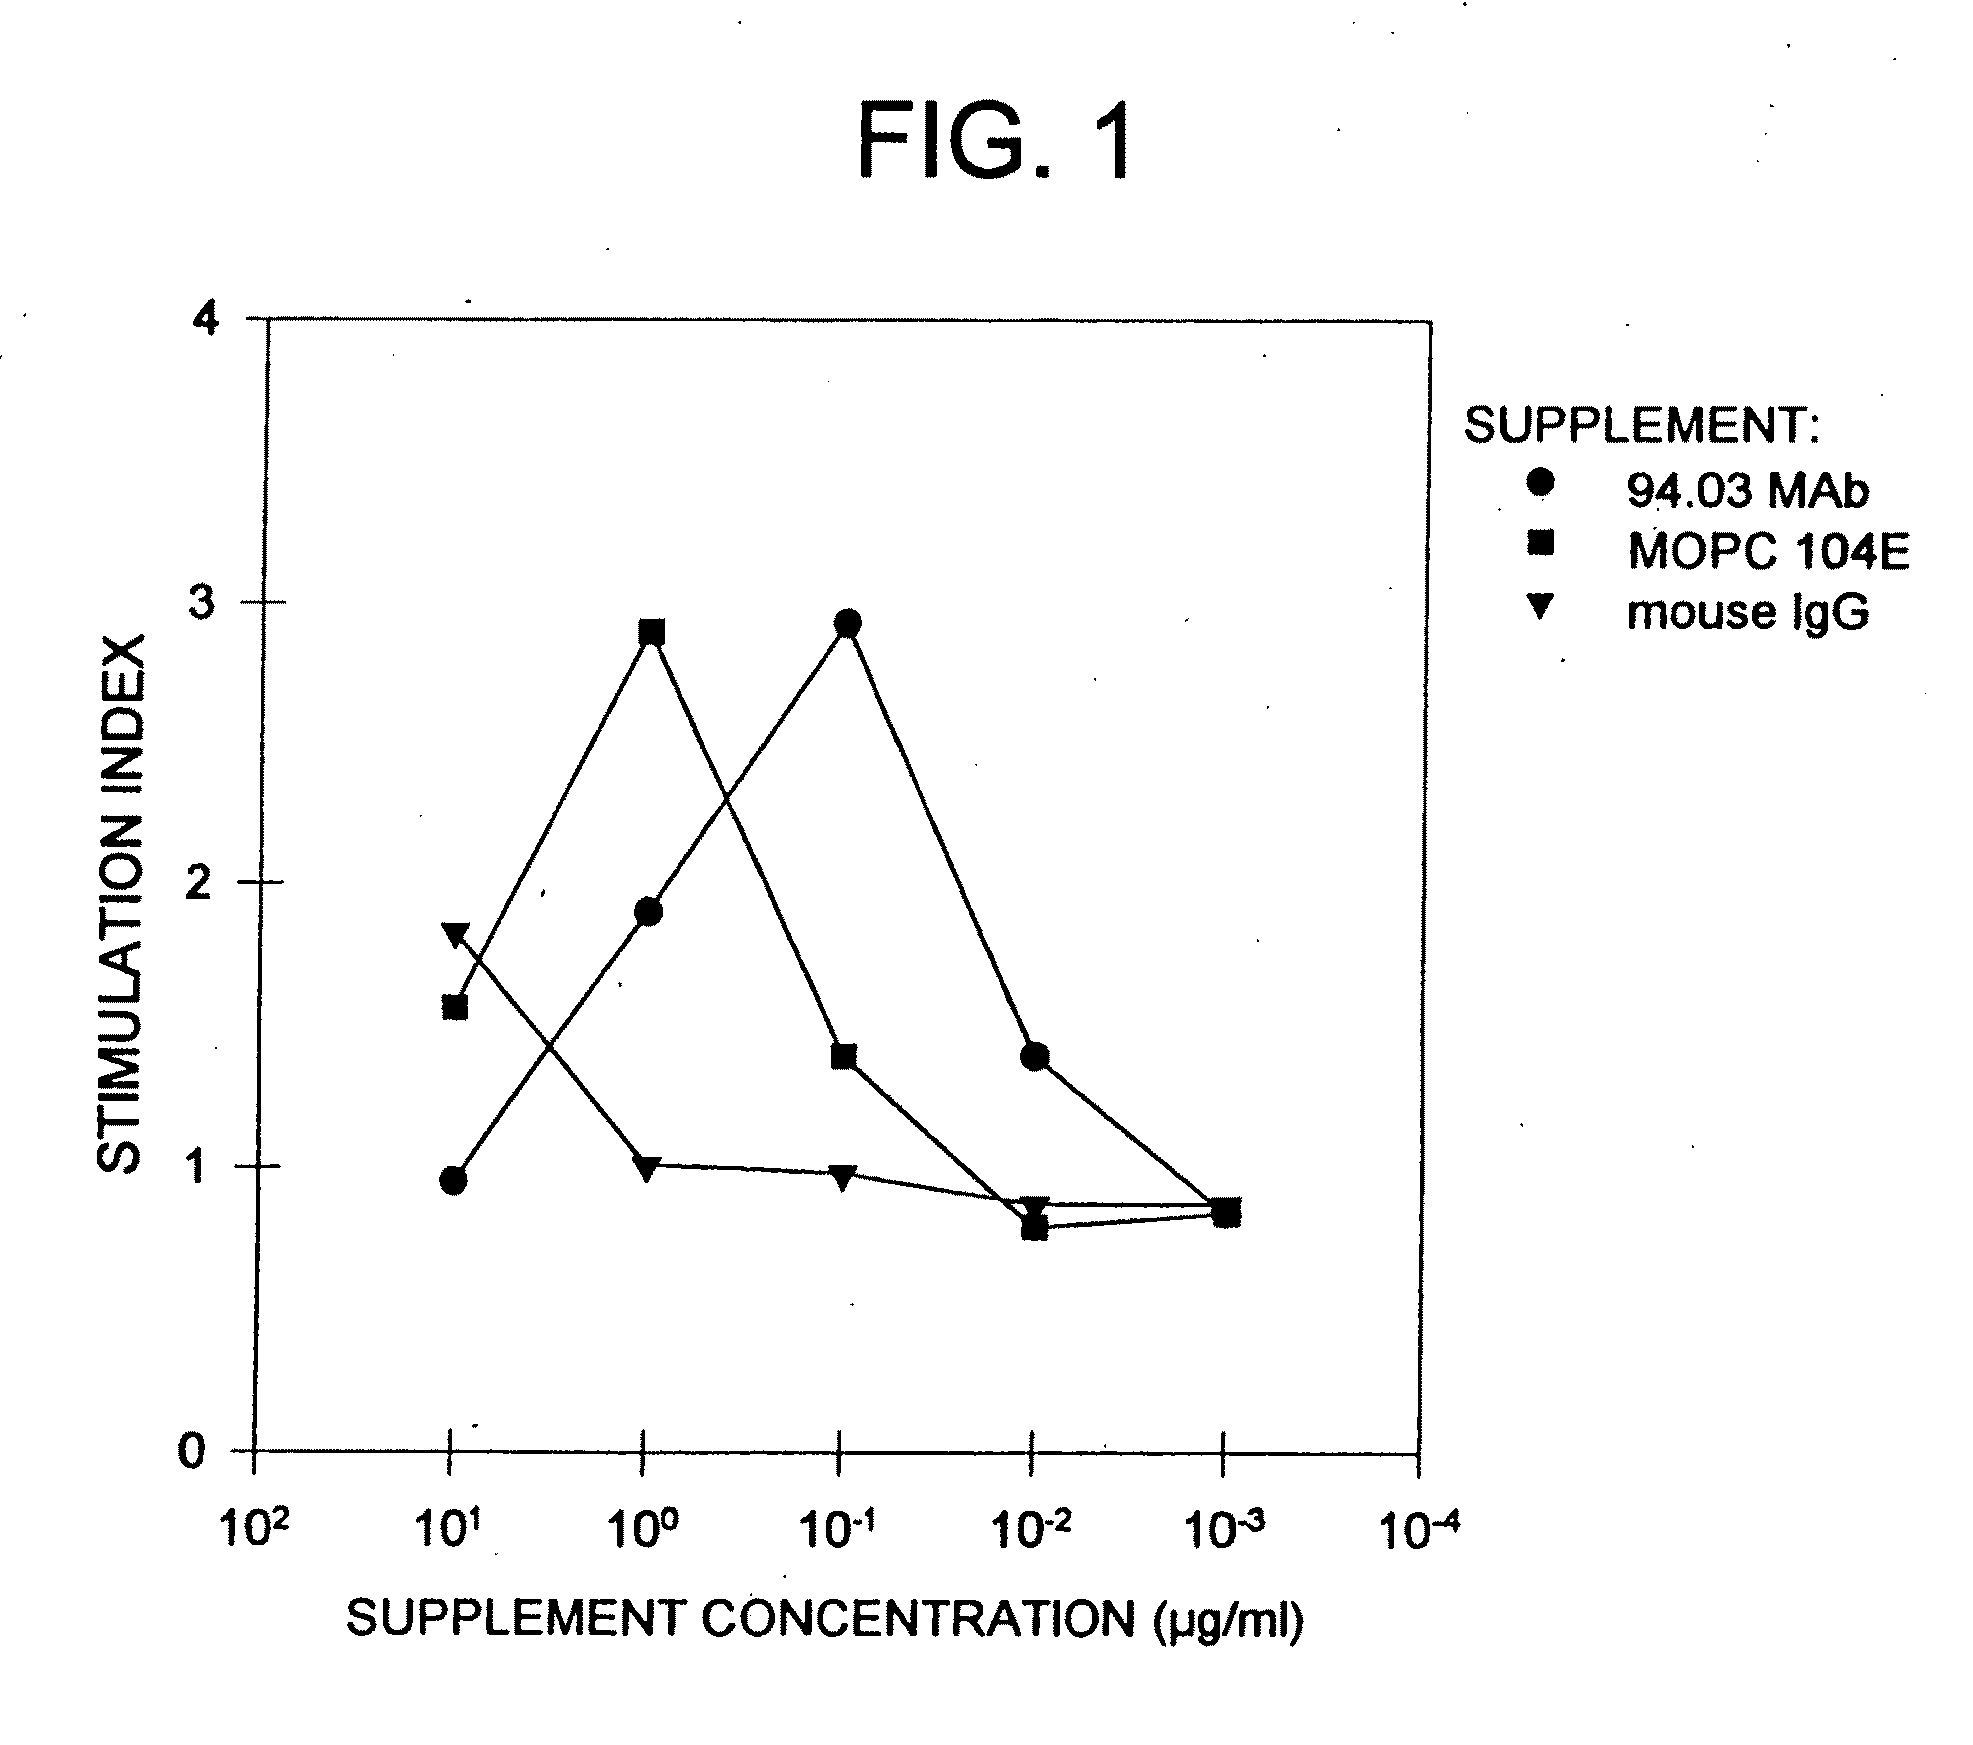 Human IgM antibodies, and diagnostic and therapeutic uses thereof particularly in the central nervous system